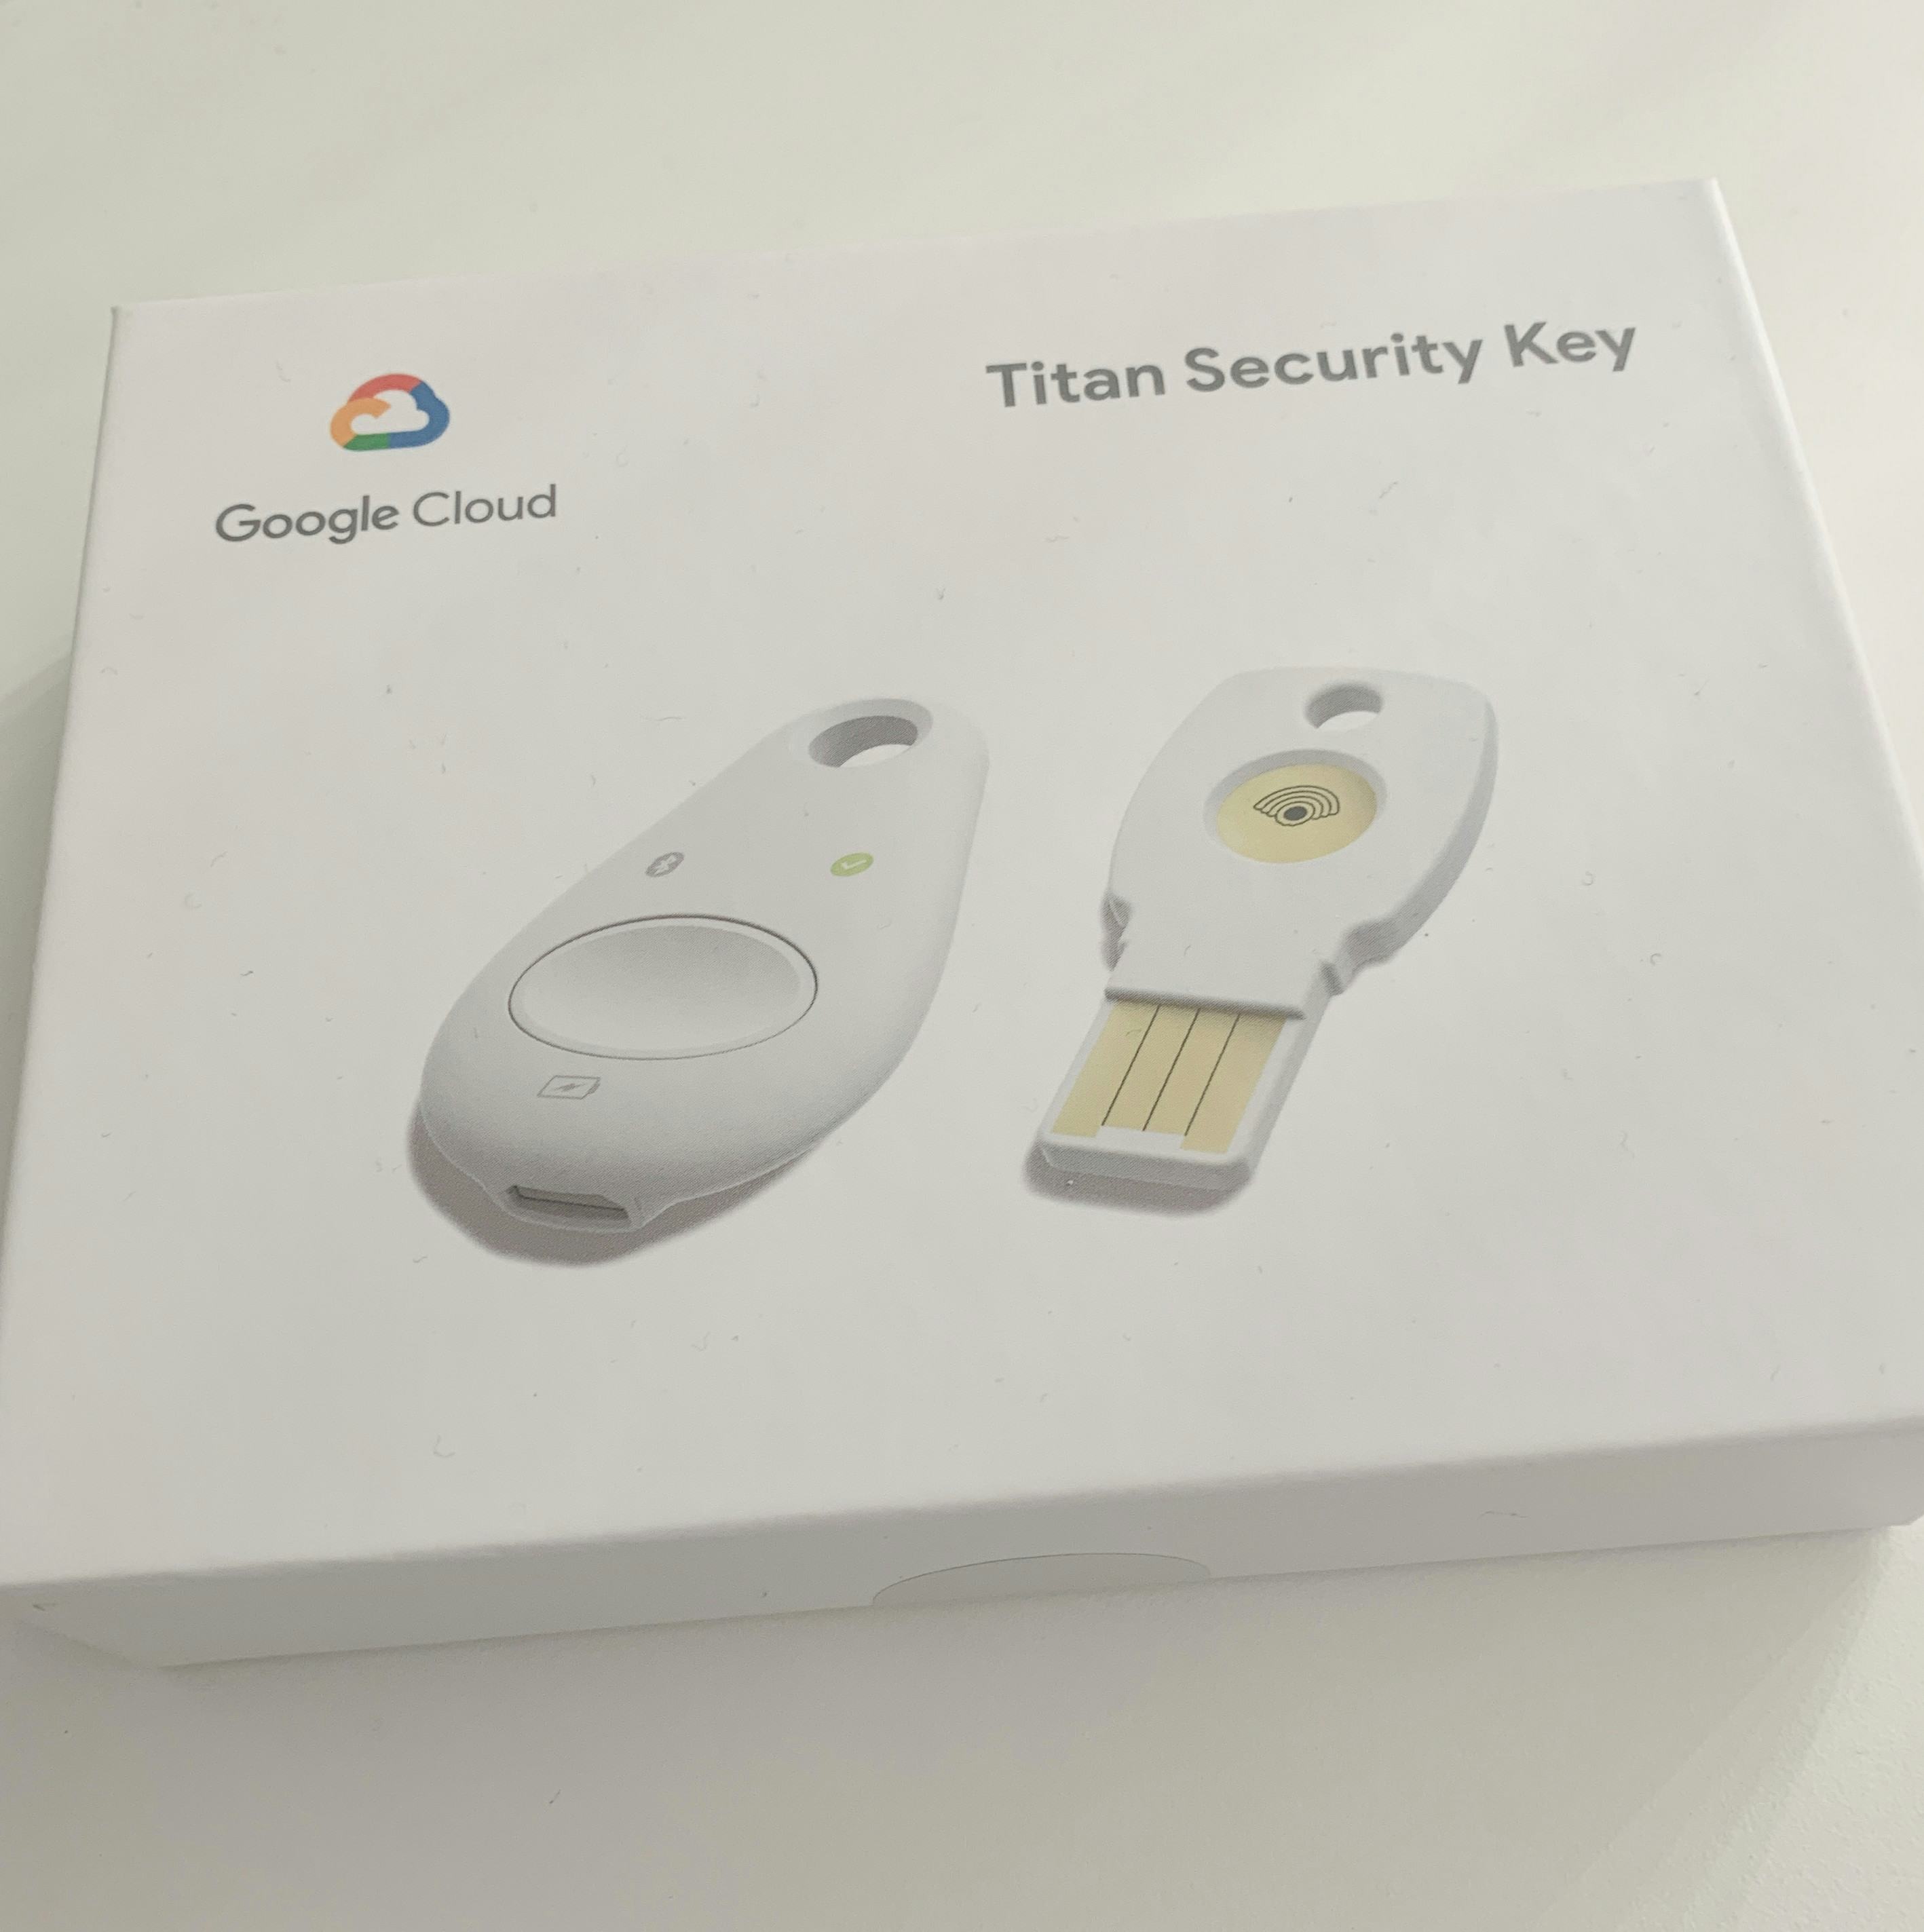 The white box of the Titan Security Keys by Google showing the bluetooth and USB 3.0 key